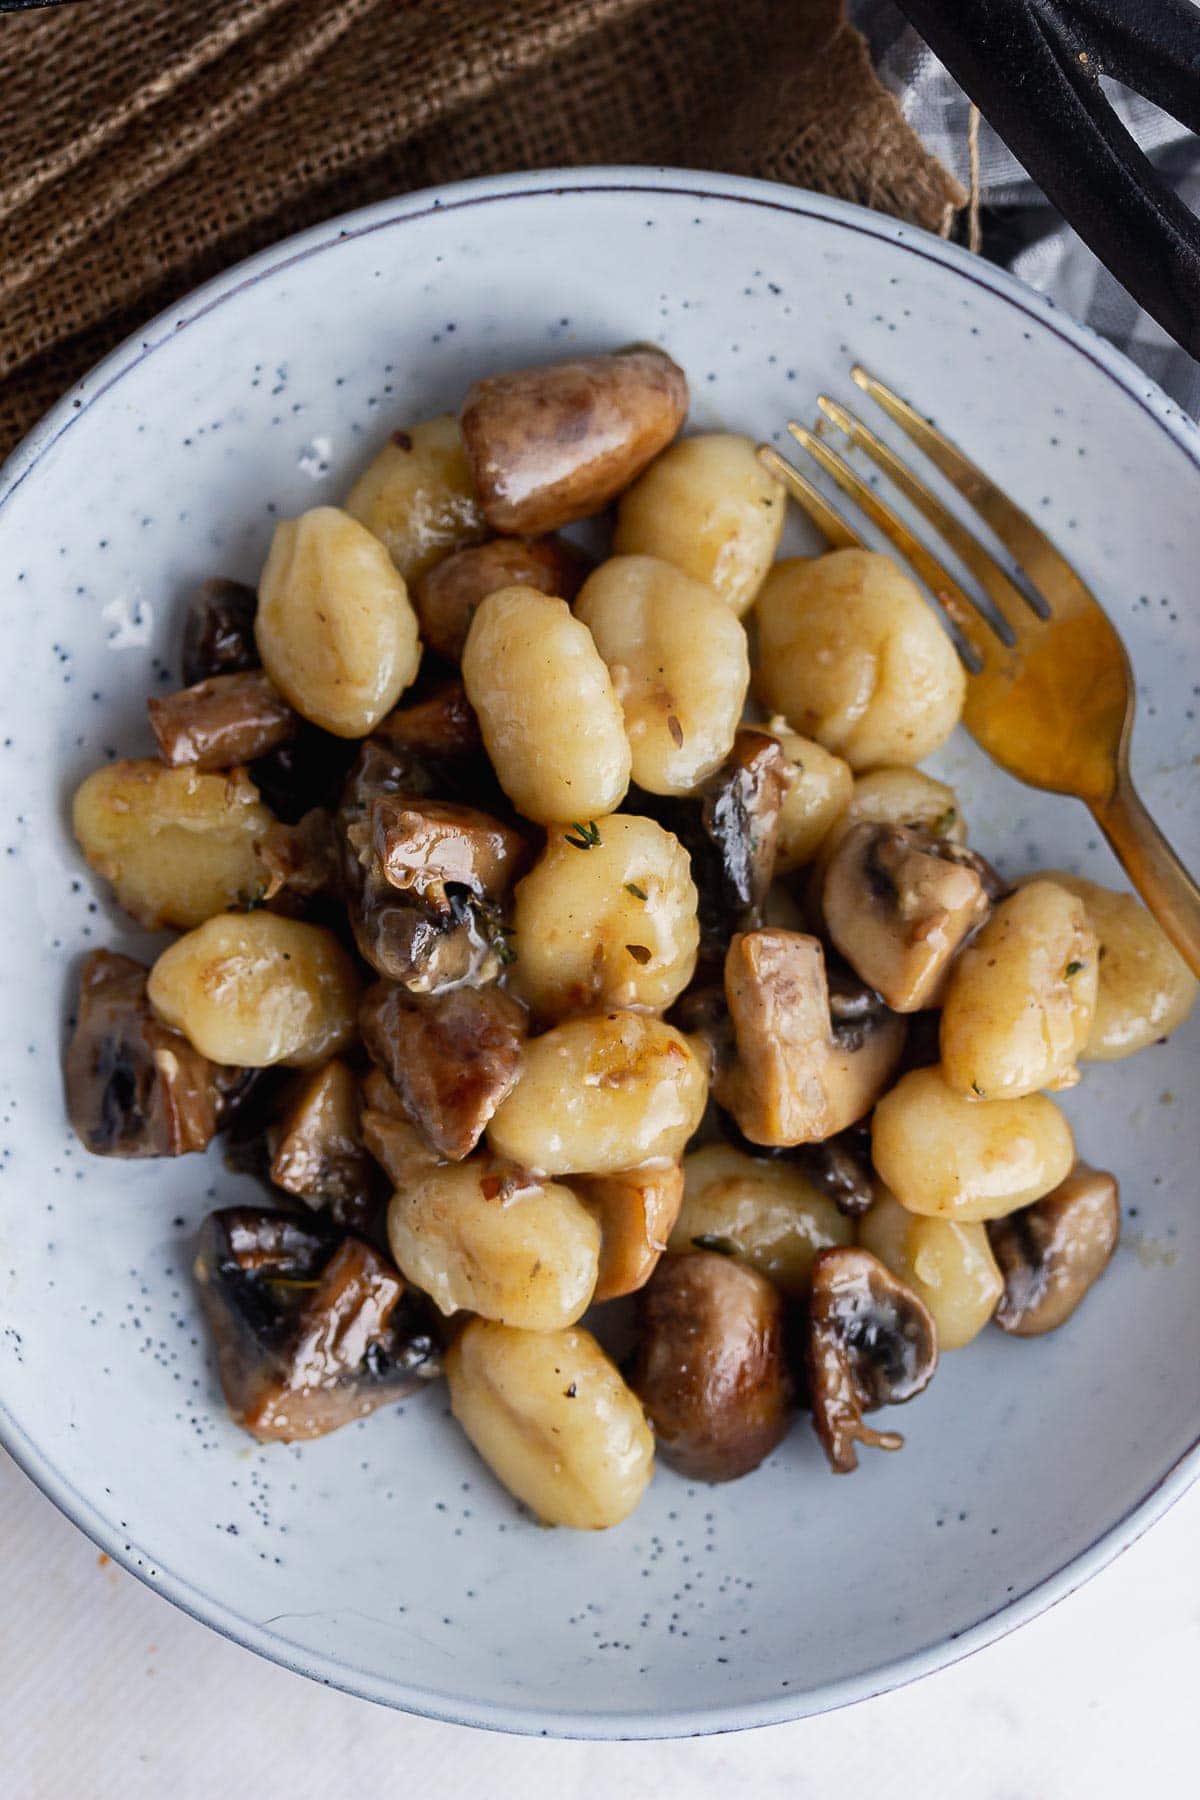 Overhead shot of gnocchi and mushrooms in a blue bowl with a gold fork